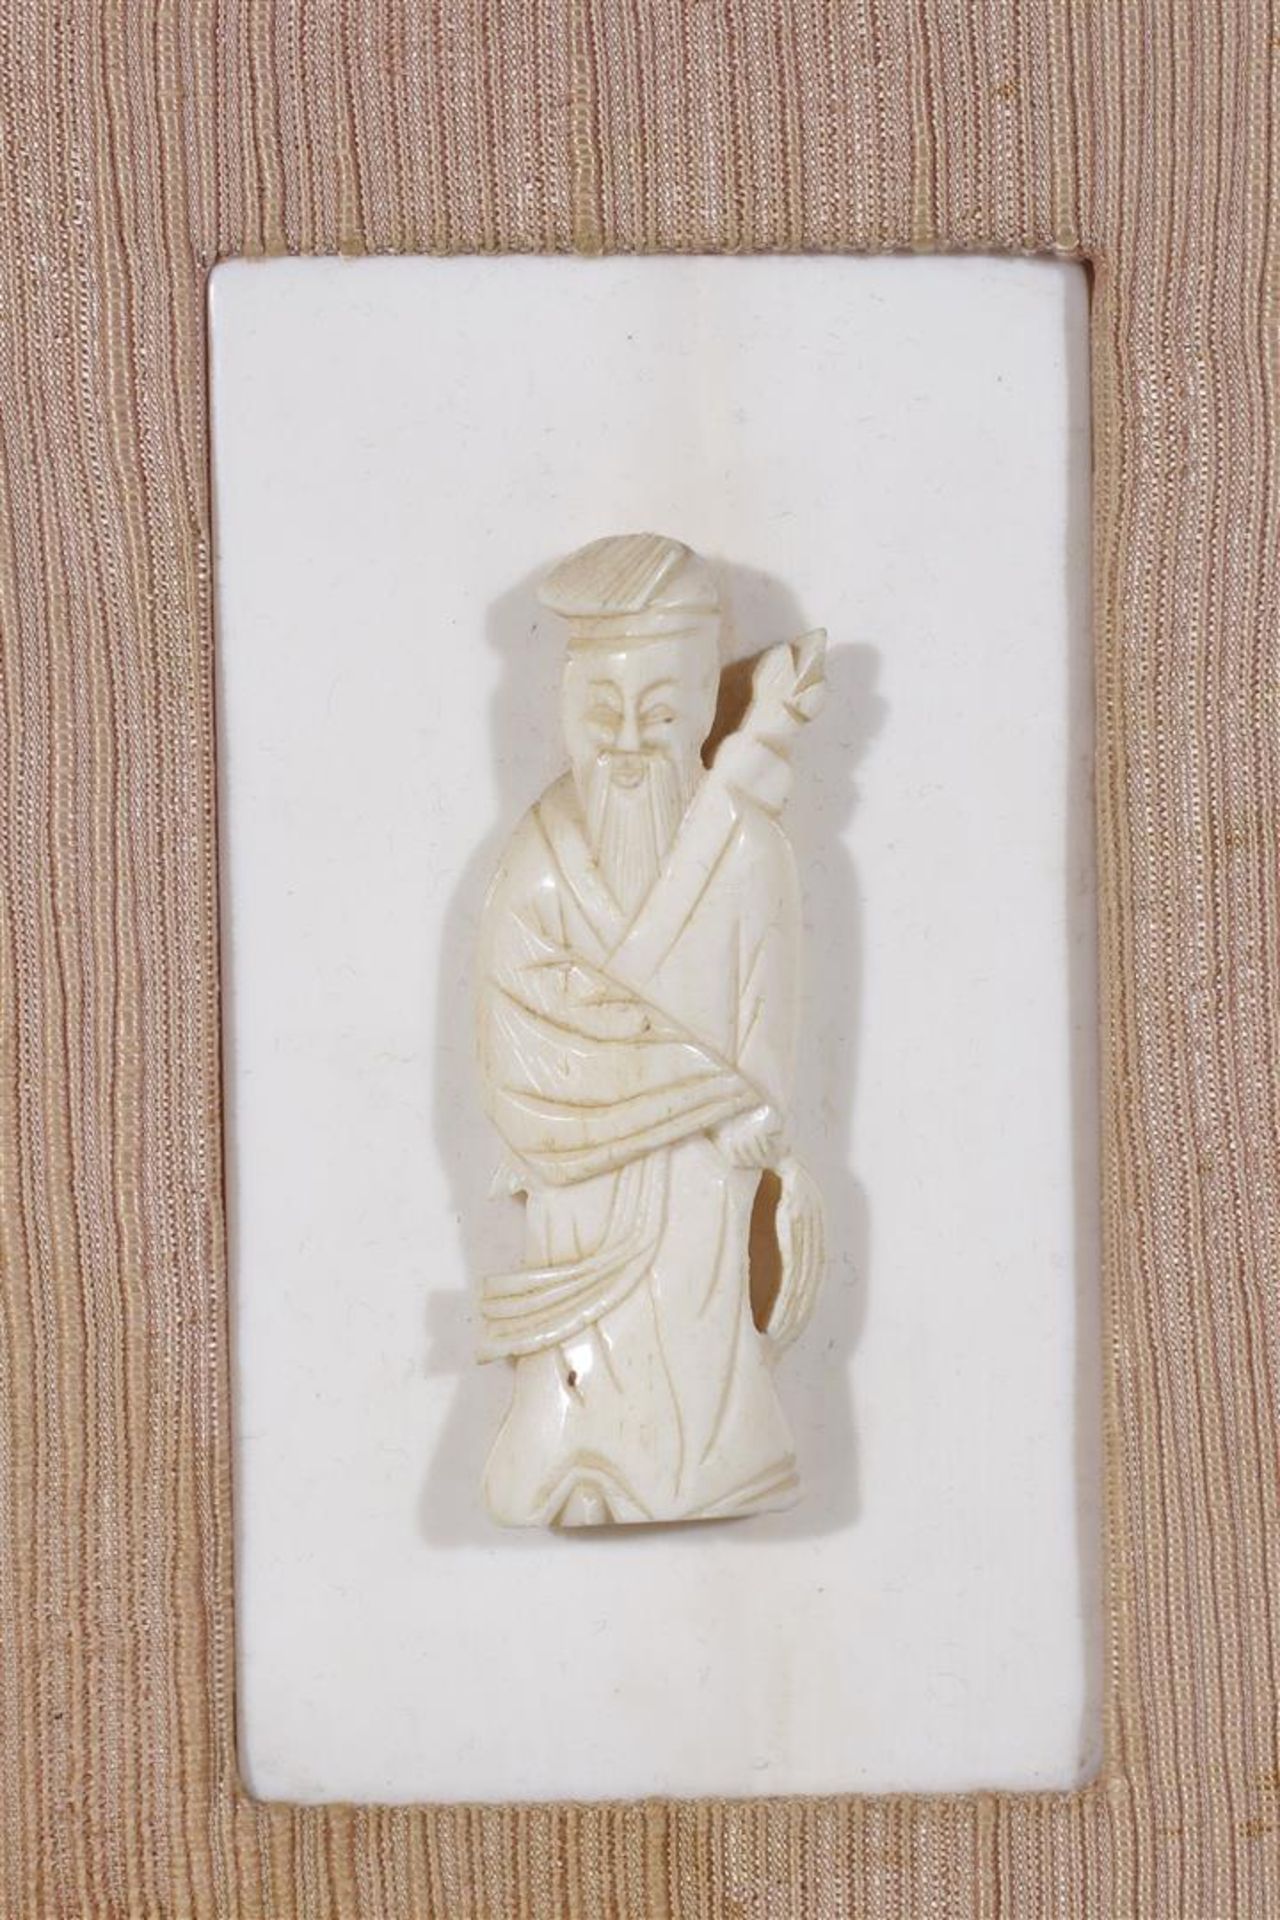 2 ivory tablets in frame with therefore a carved ivory statue of a person, China ca.1880, ivory is - Bild 3 aus 3